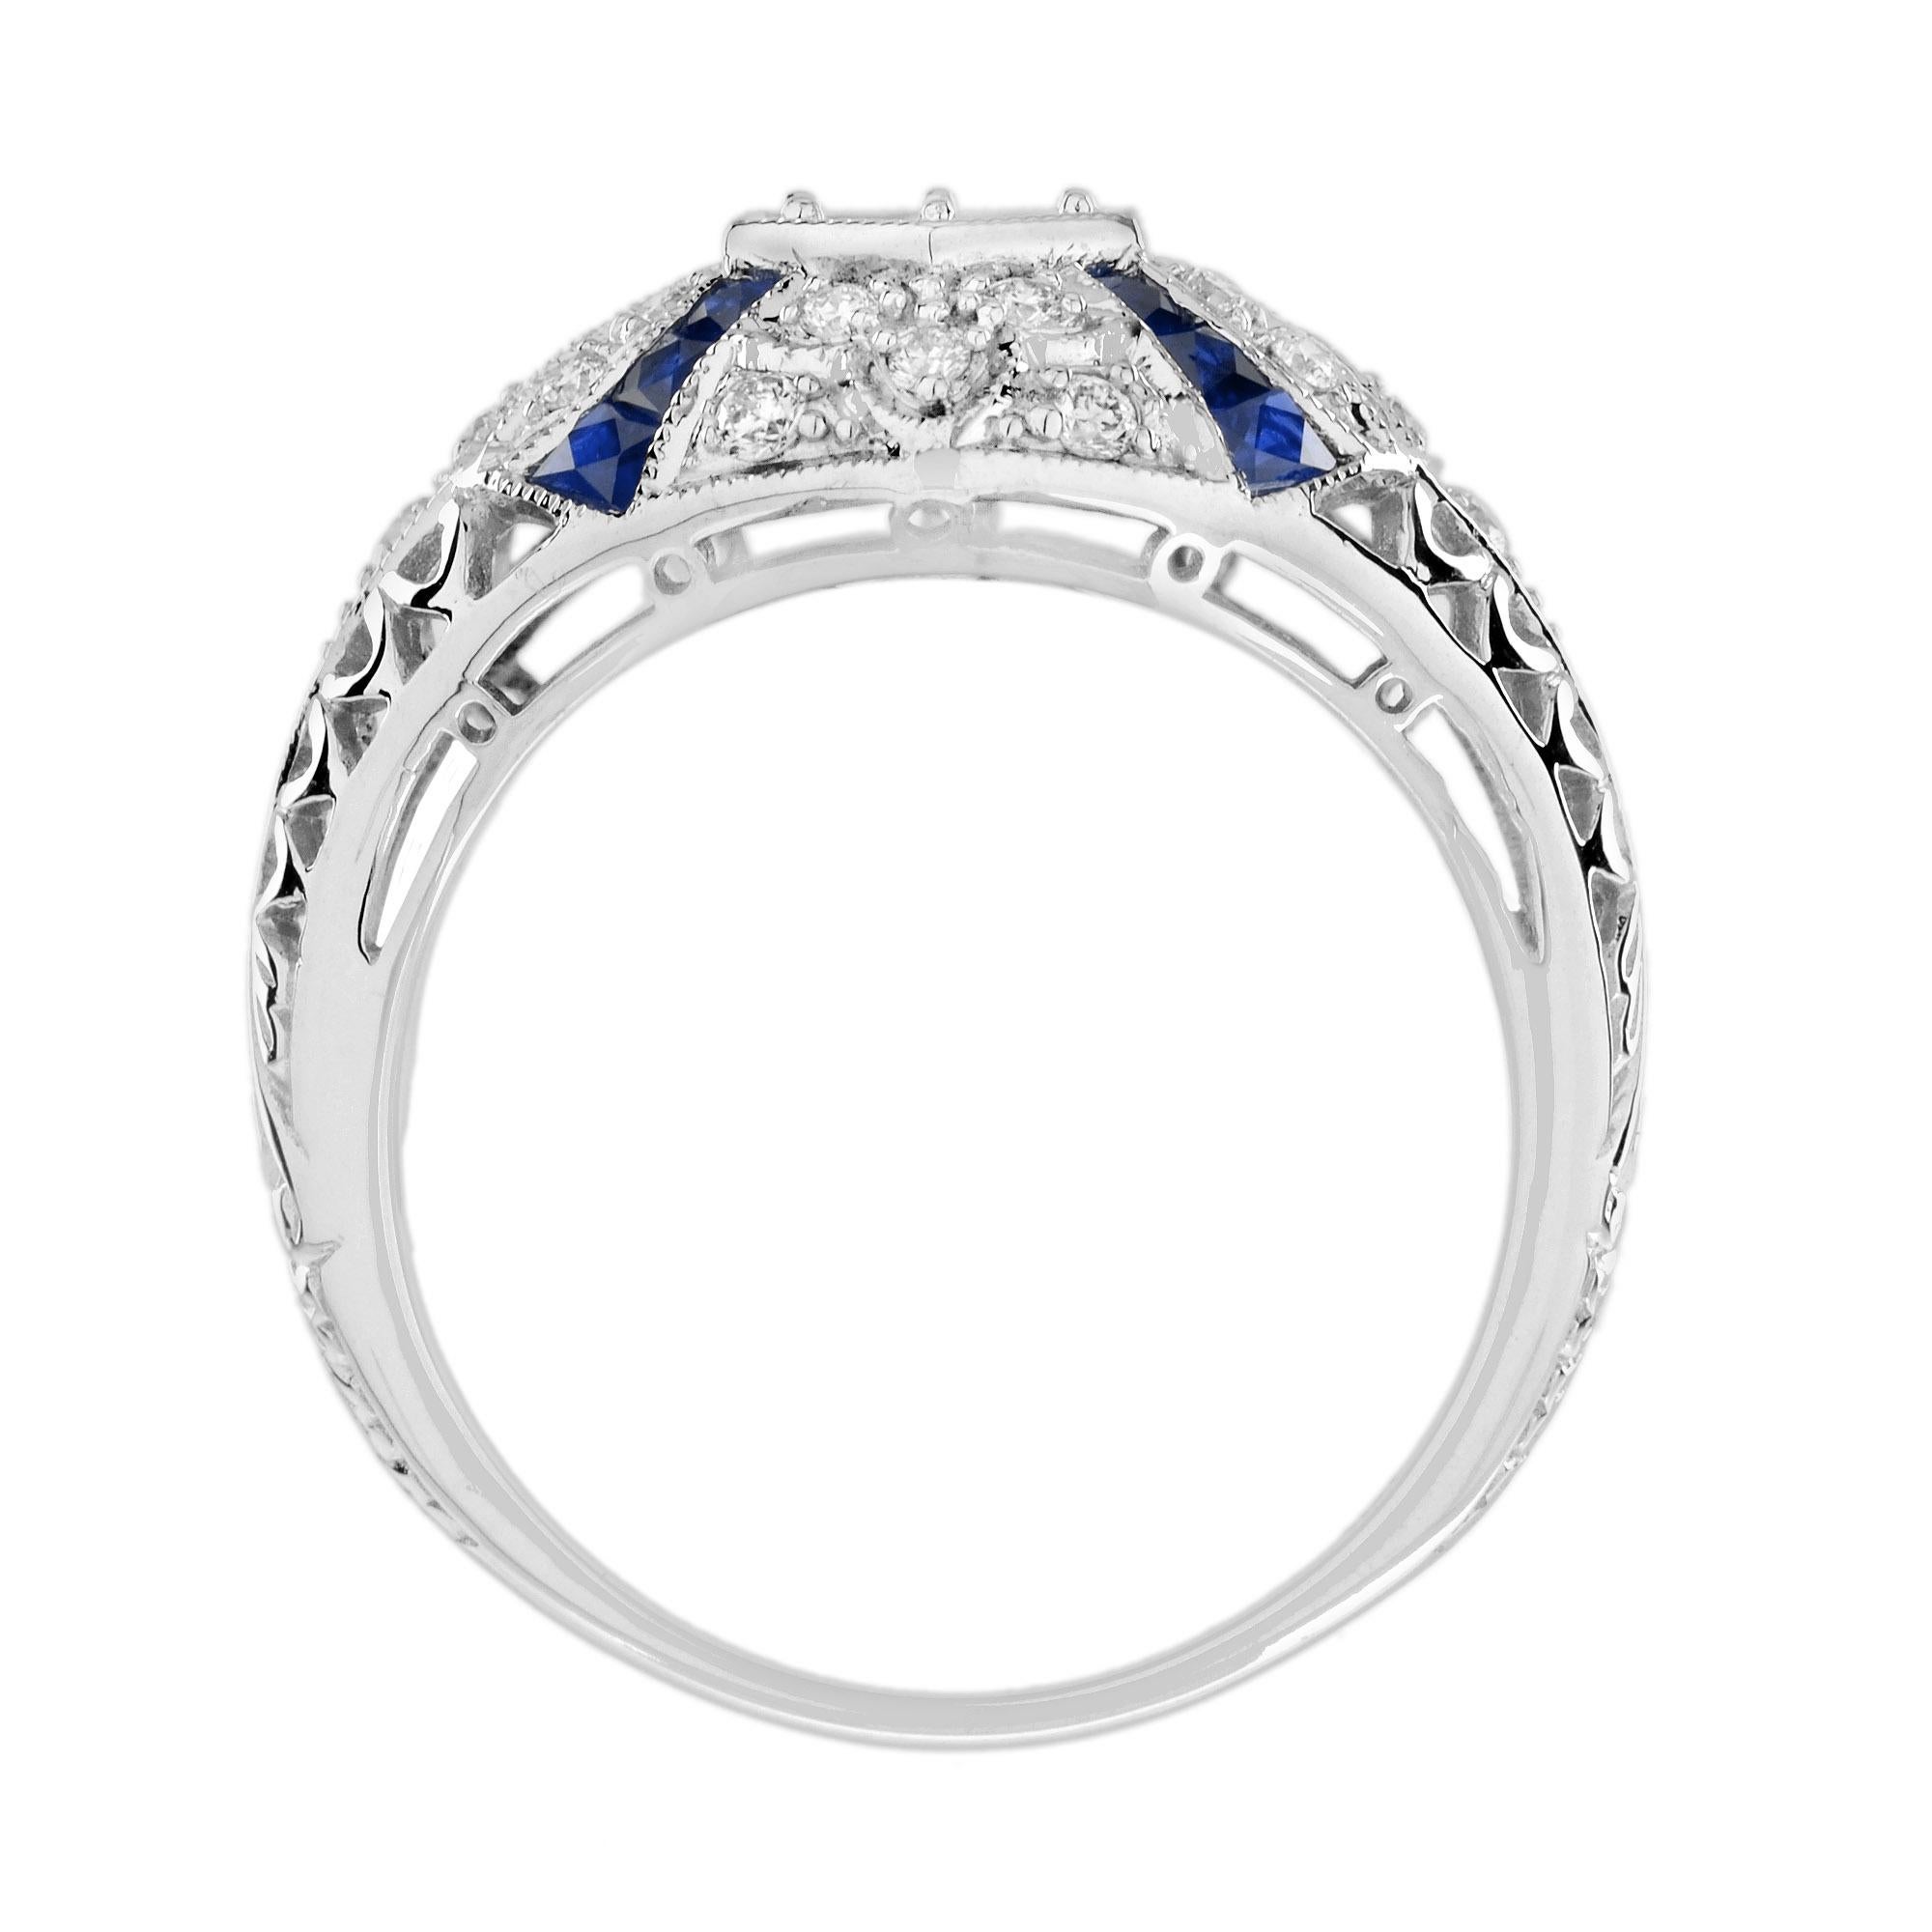 Diamond and Blue Sapphire Art Deco Style Engagement Ring in 18K White Gold  For Sale 1